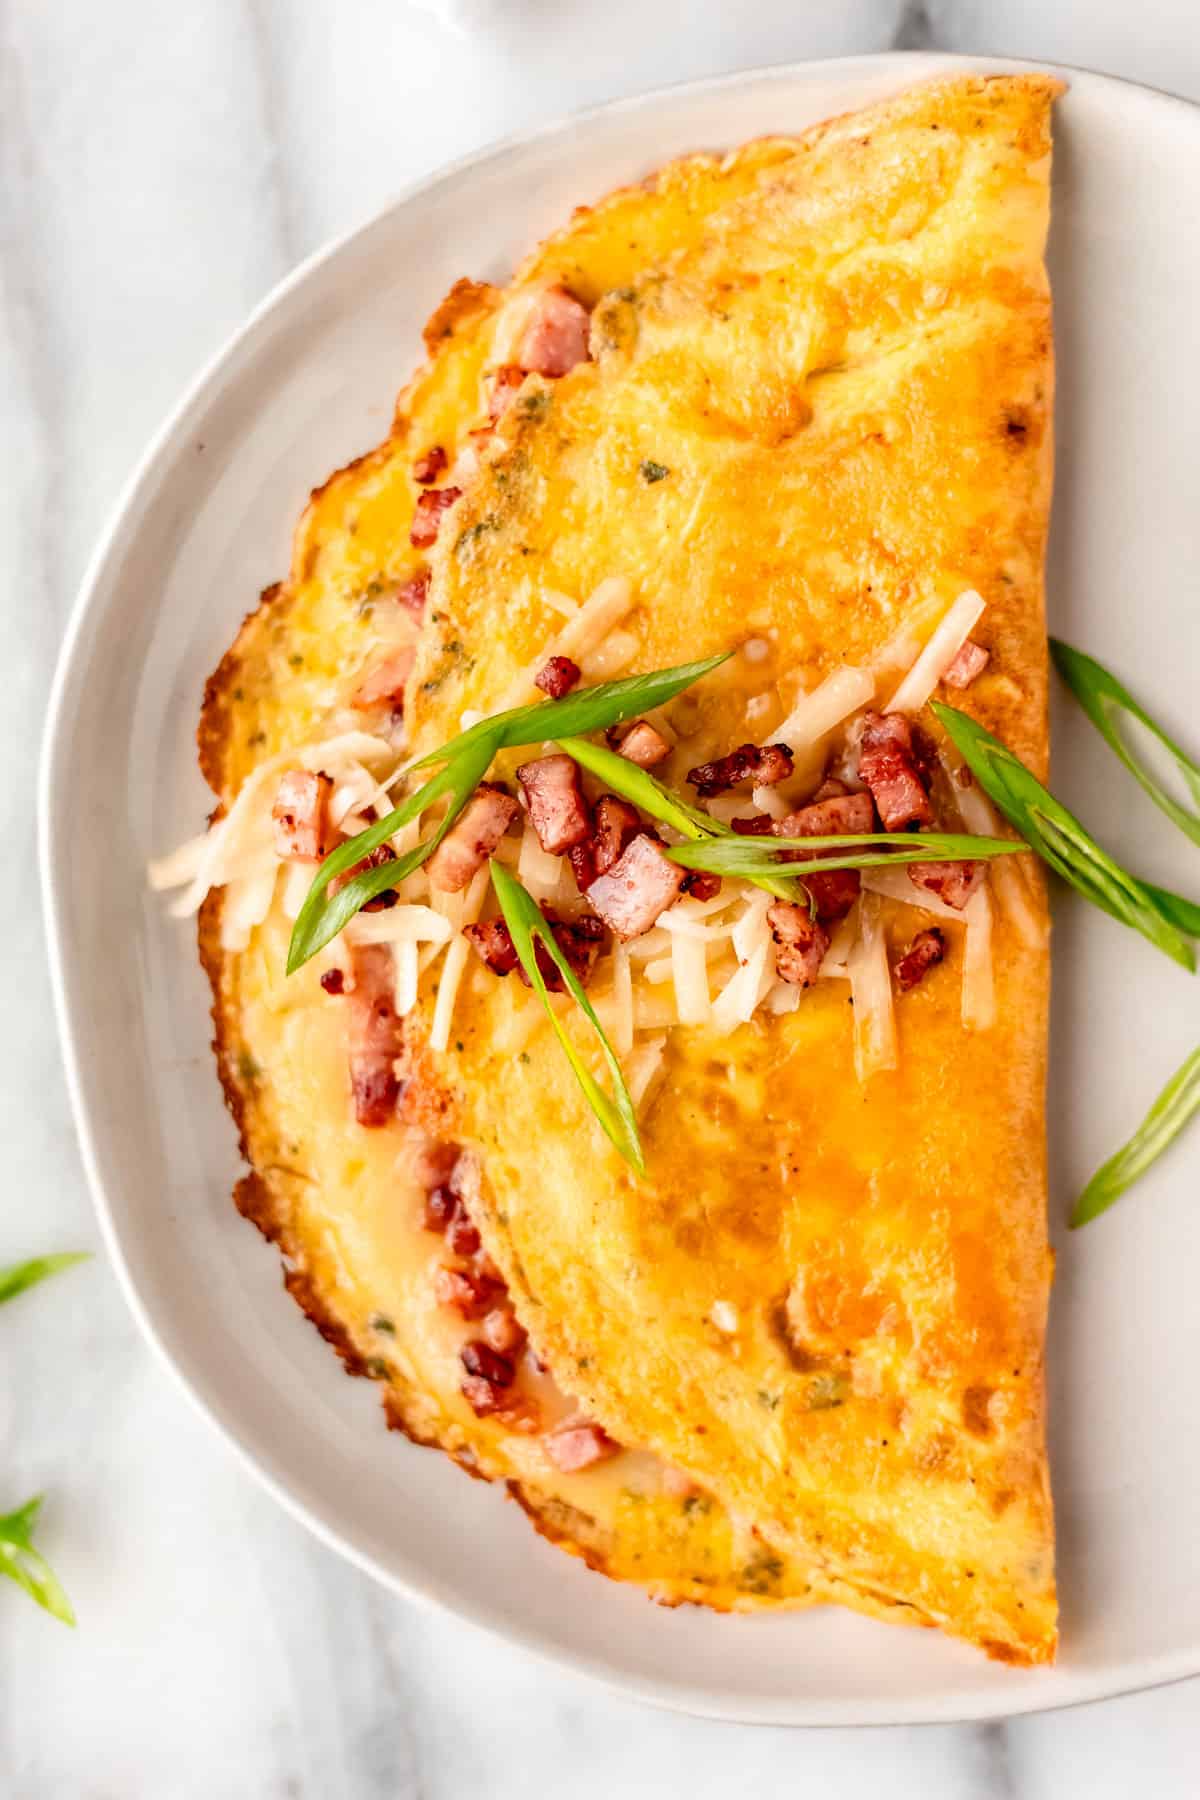 Close up of a ham and cheese omelet garnished with diced ham, cheese and green onions.